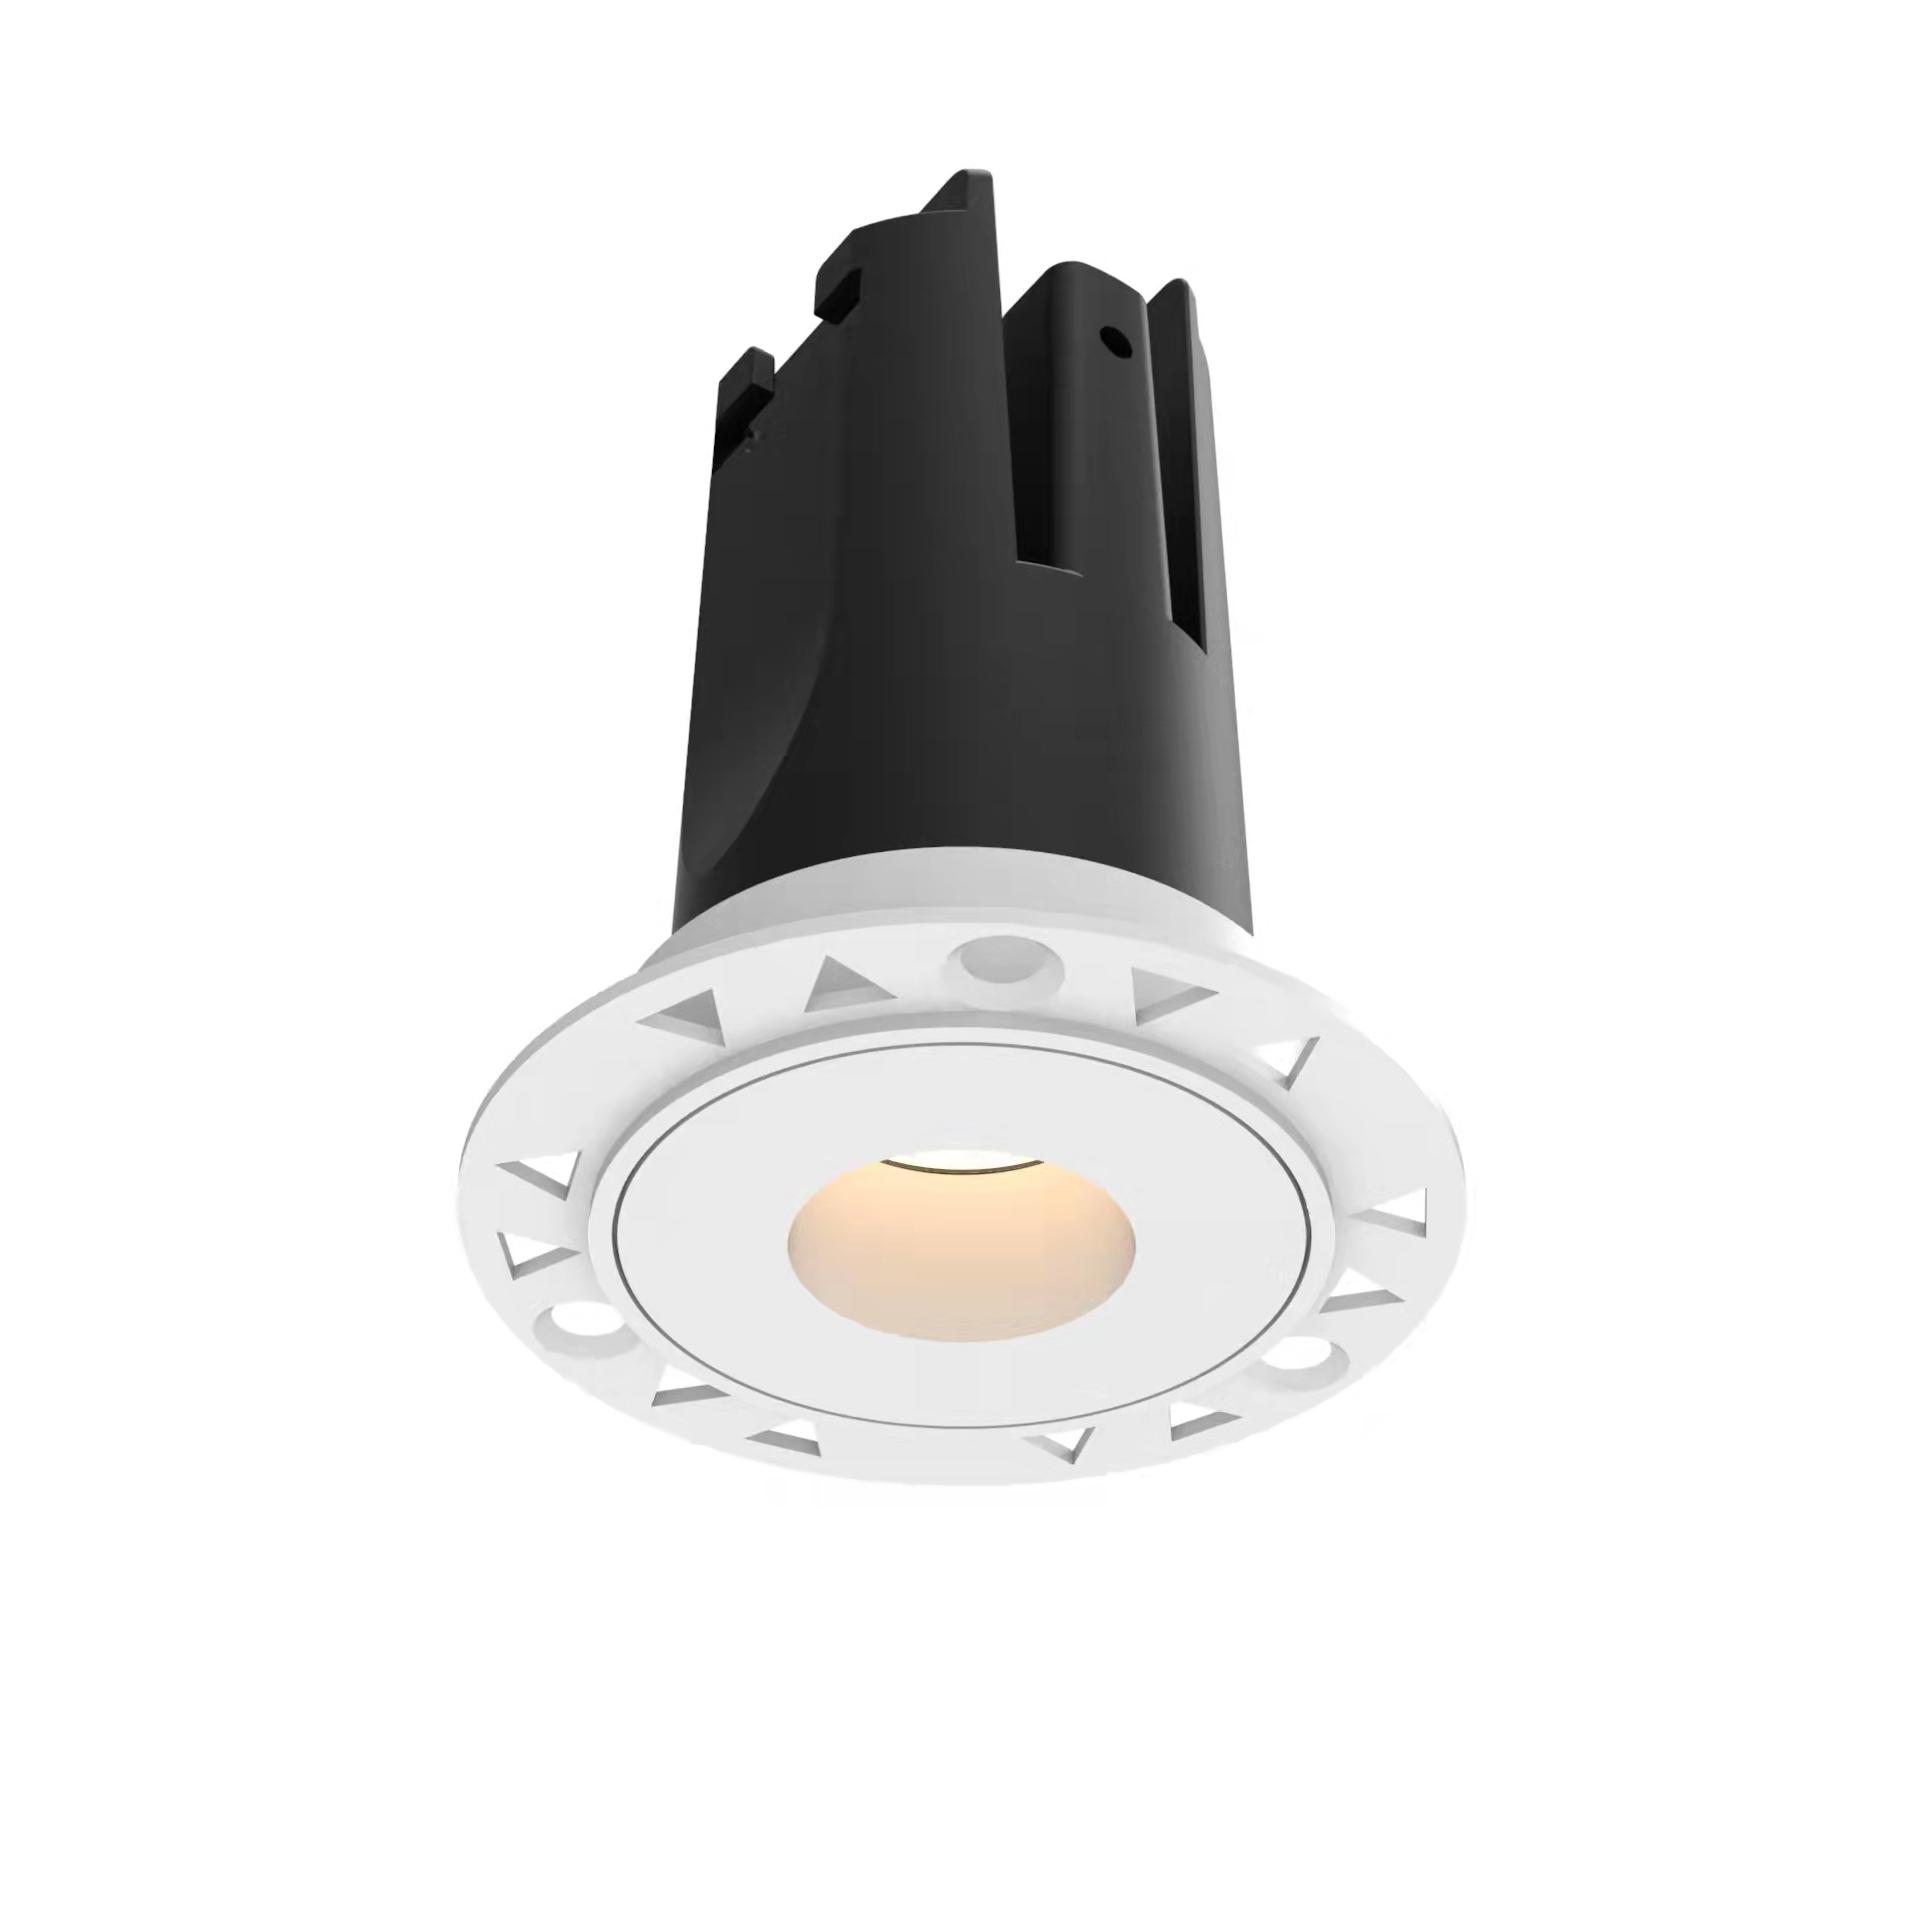 Trimless Downlights Led Compact Size Cut Hole 35mm For Commerical Lighitng